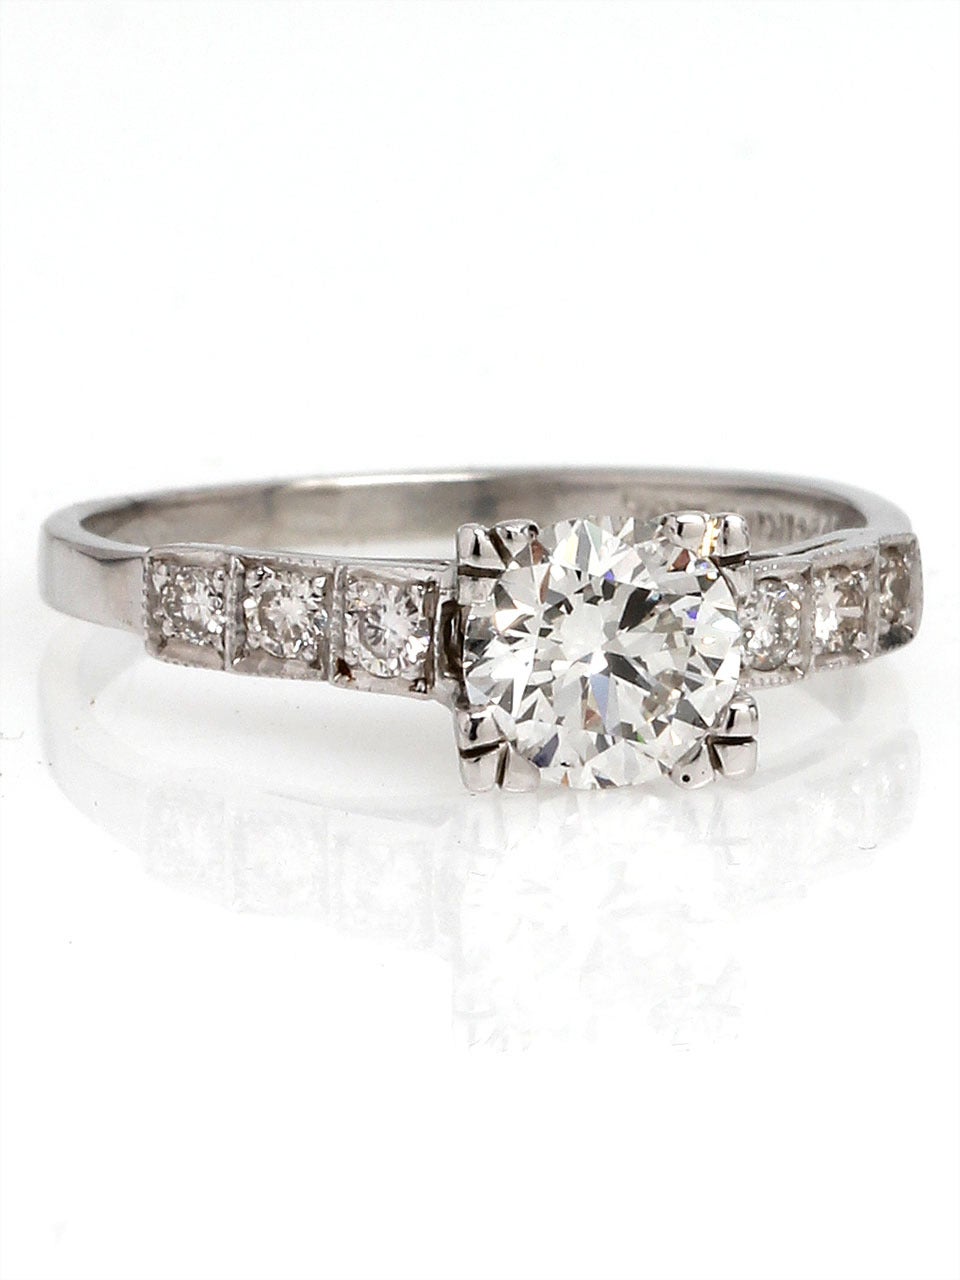 This lovely diamond platinum engagement ring dates from the 1930's and features an EGL lab certified 0.77ct full cut round brilliant diamond rated F colorless/SI1. This stunningly bright center stone is framed by a classic Art Deco stair step design